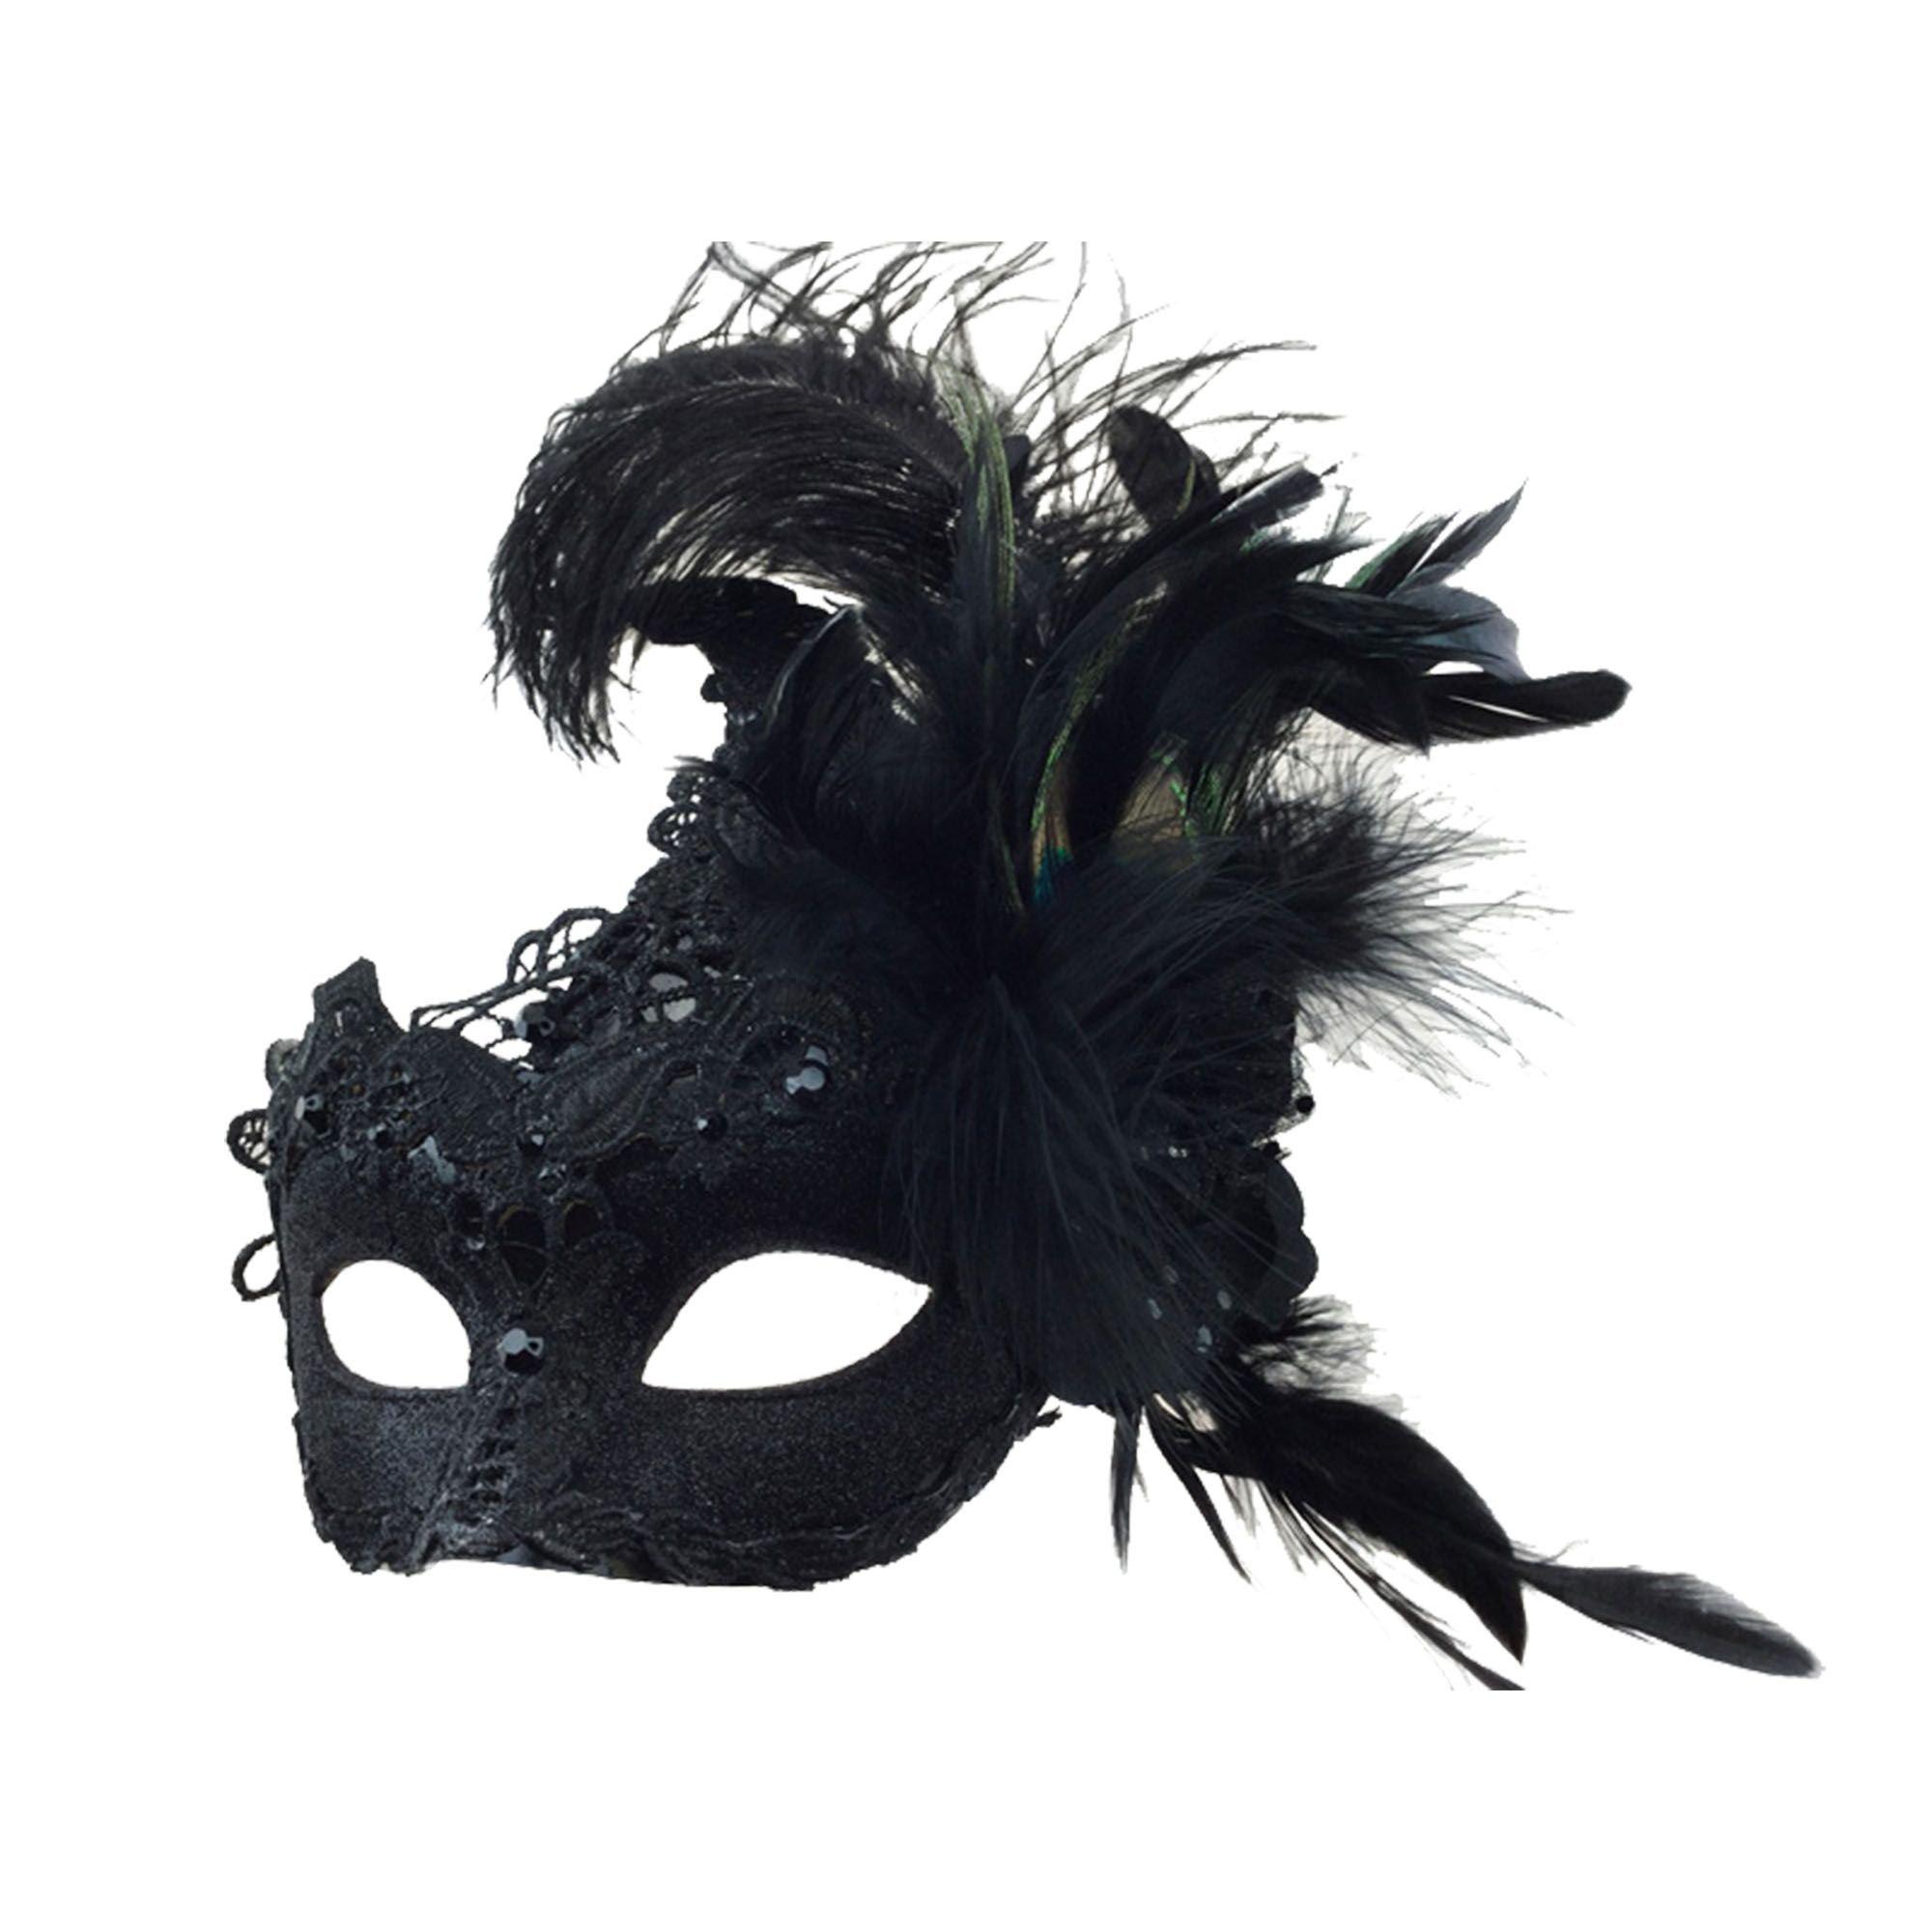 High End Venetian Party City Masquerade Mask For Halloween And Dance  Performances European And American Painted Design For A Perfectly Crafted  Look 230729 From Xuan10, $31.46